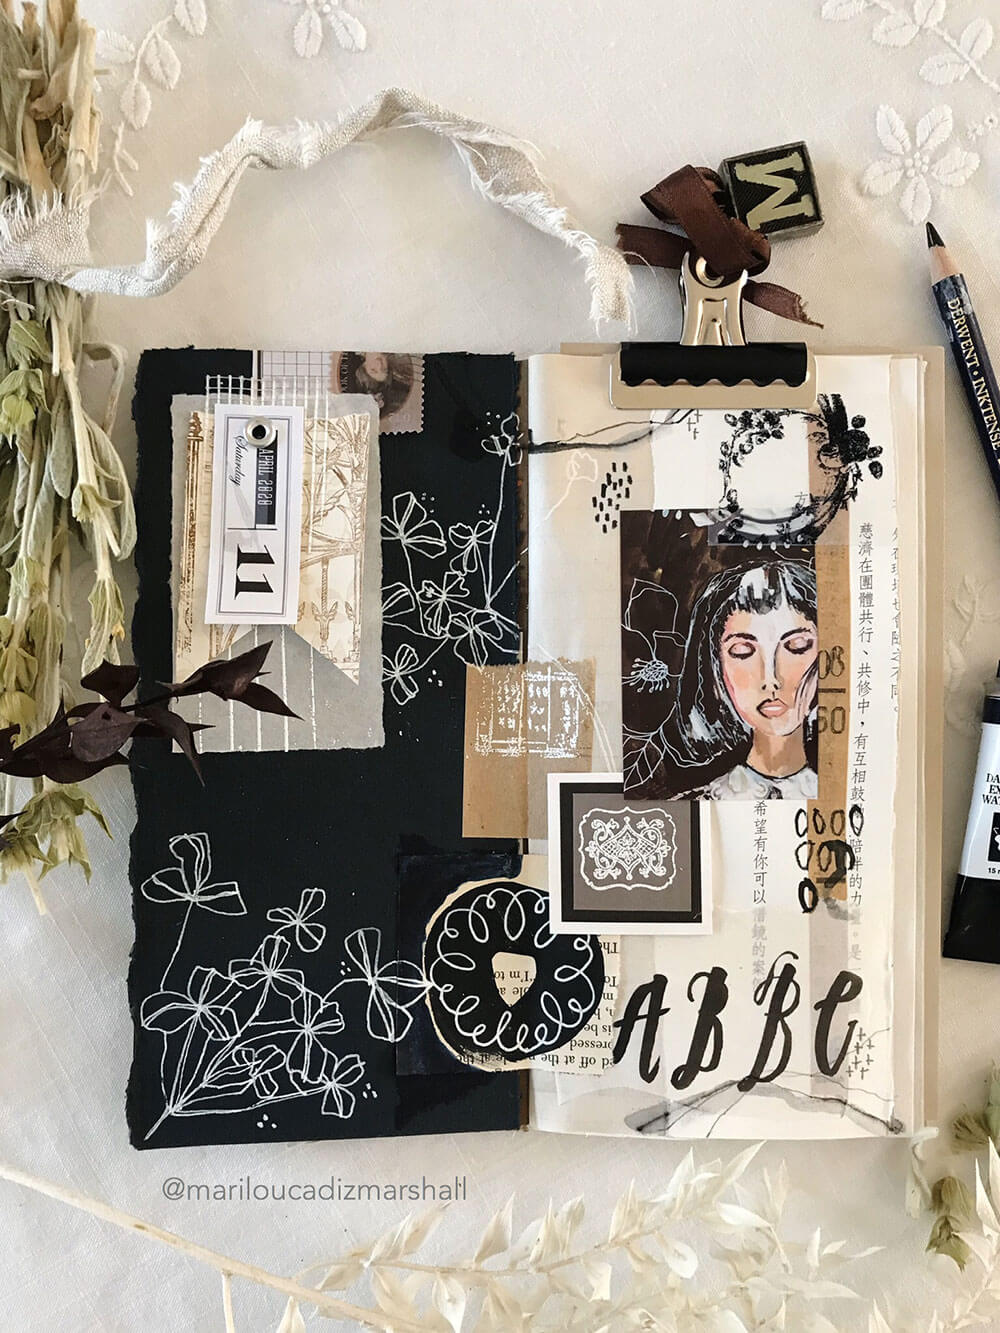 Details of Marilou’s journal spread